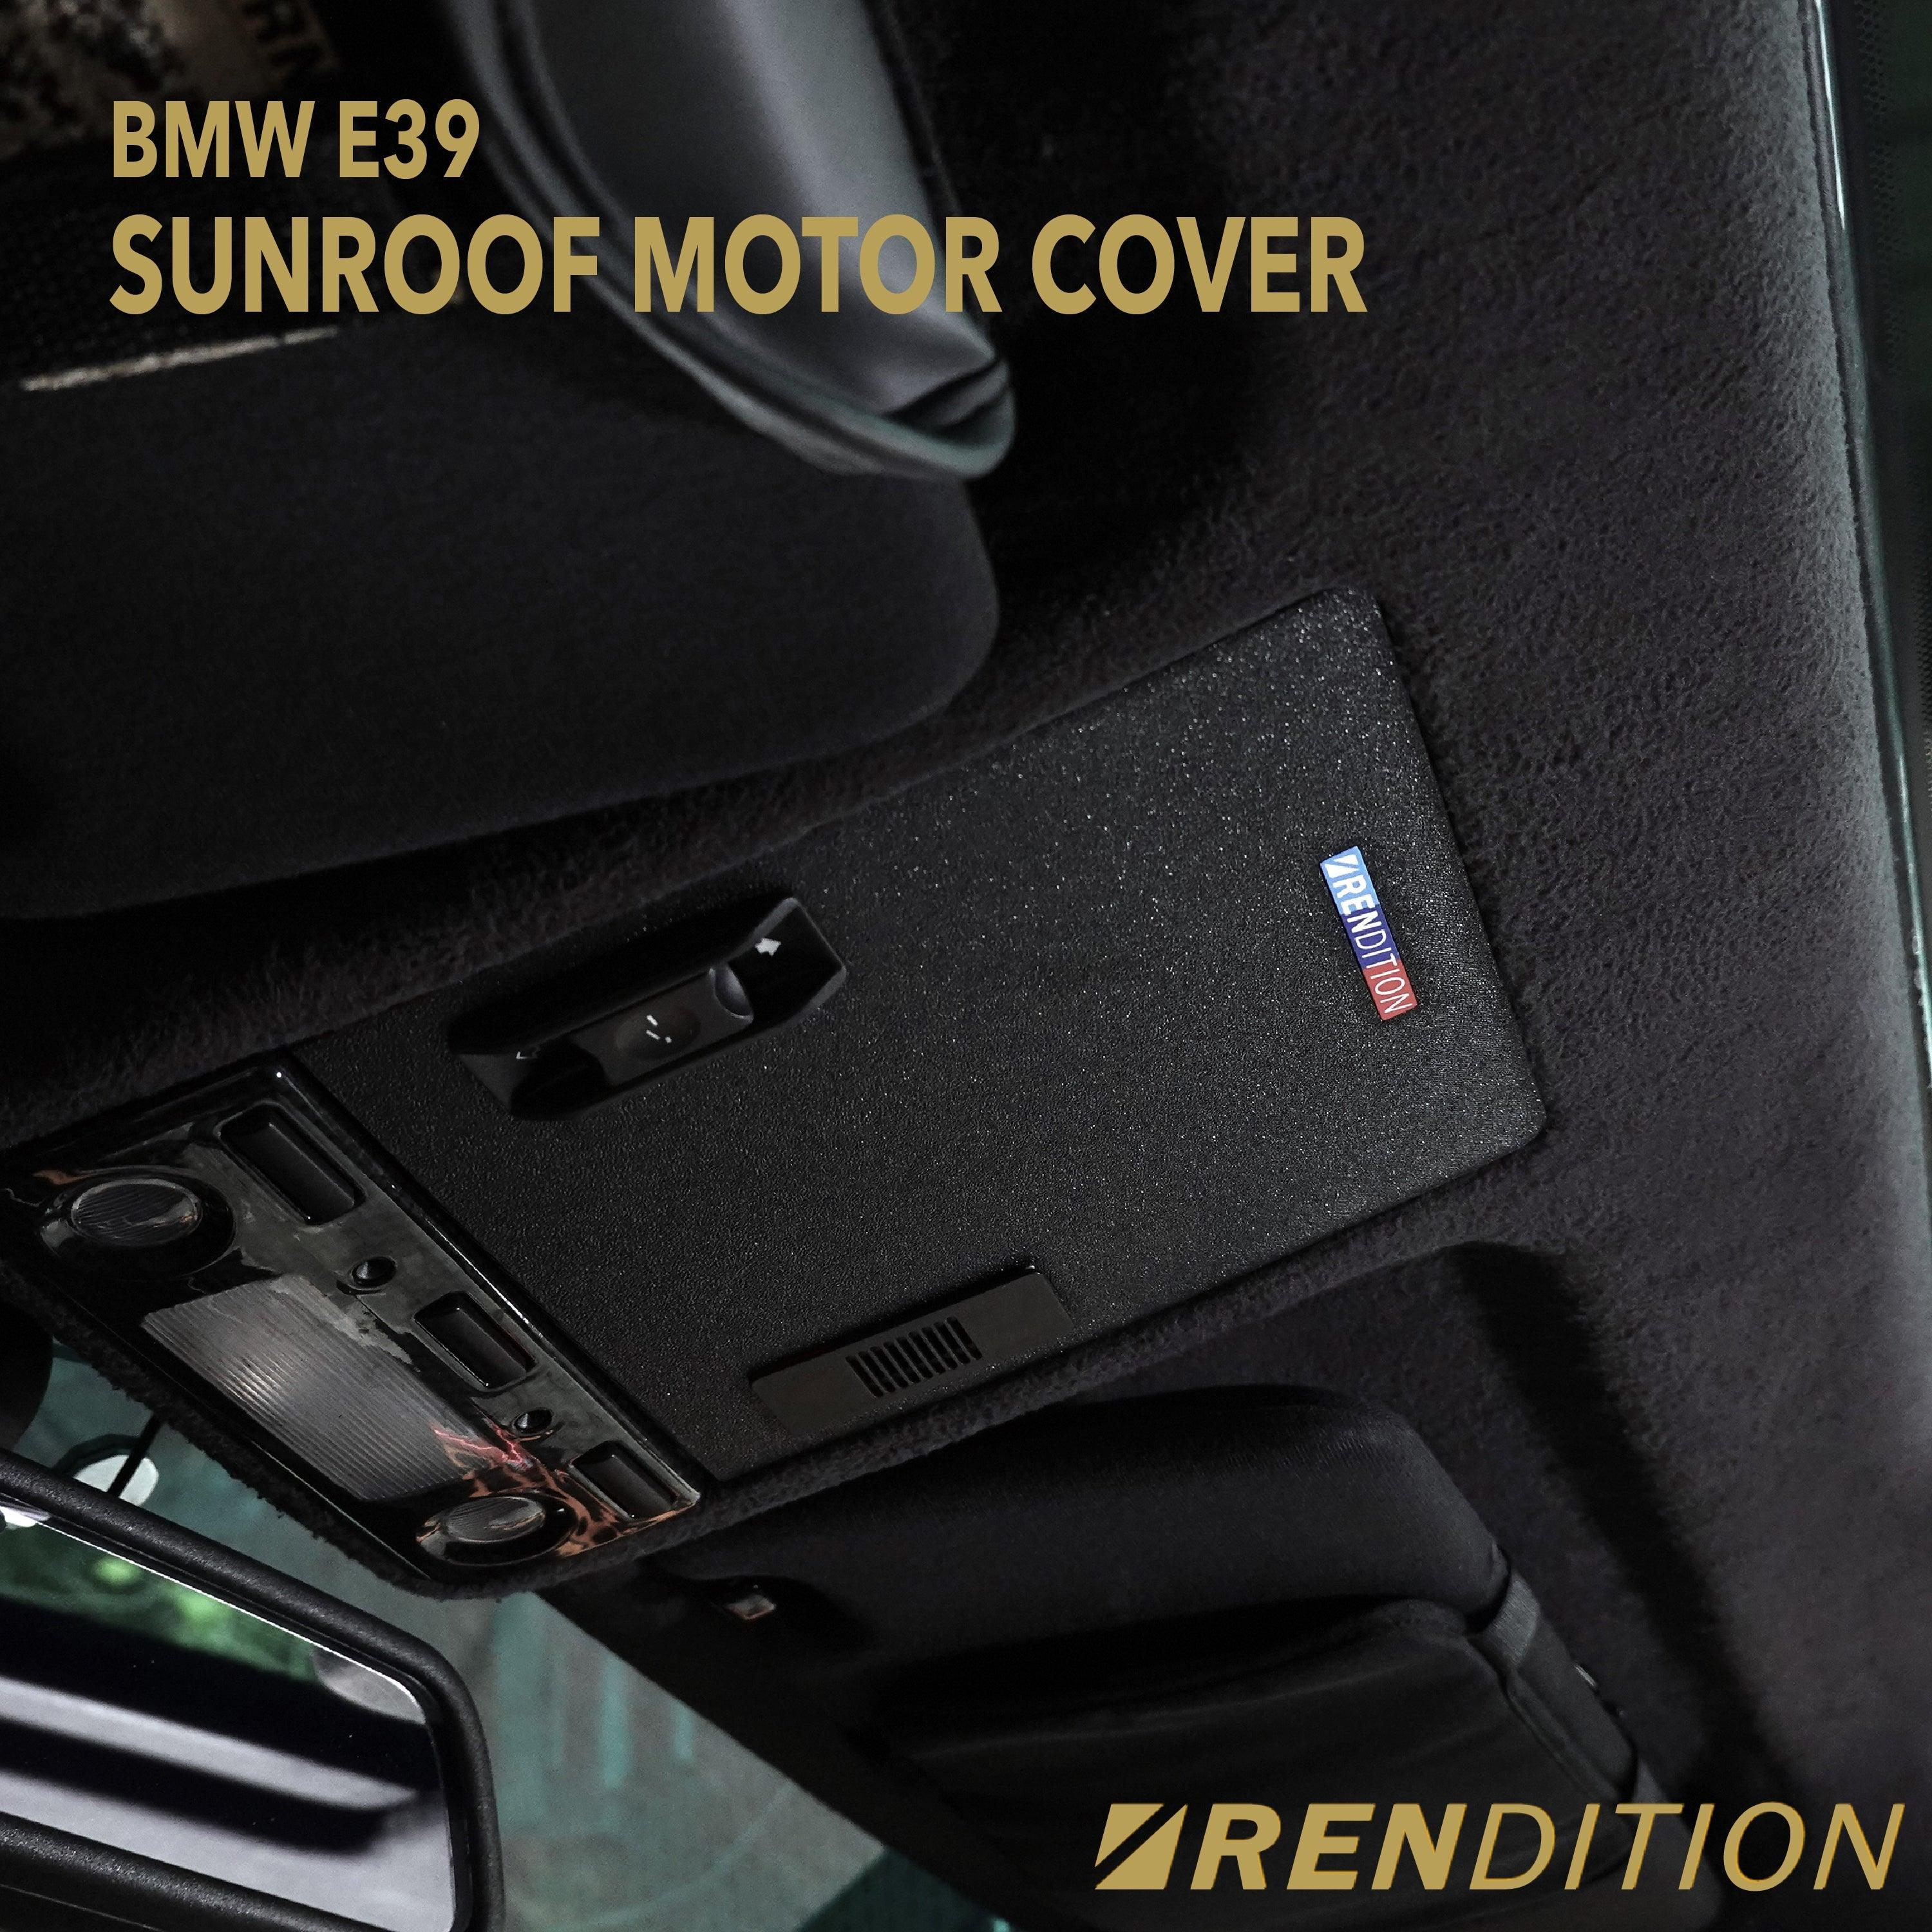 BMW E39 SUNROOF MOTOR COVER - K2 Industries